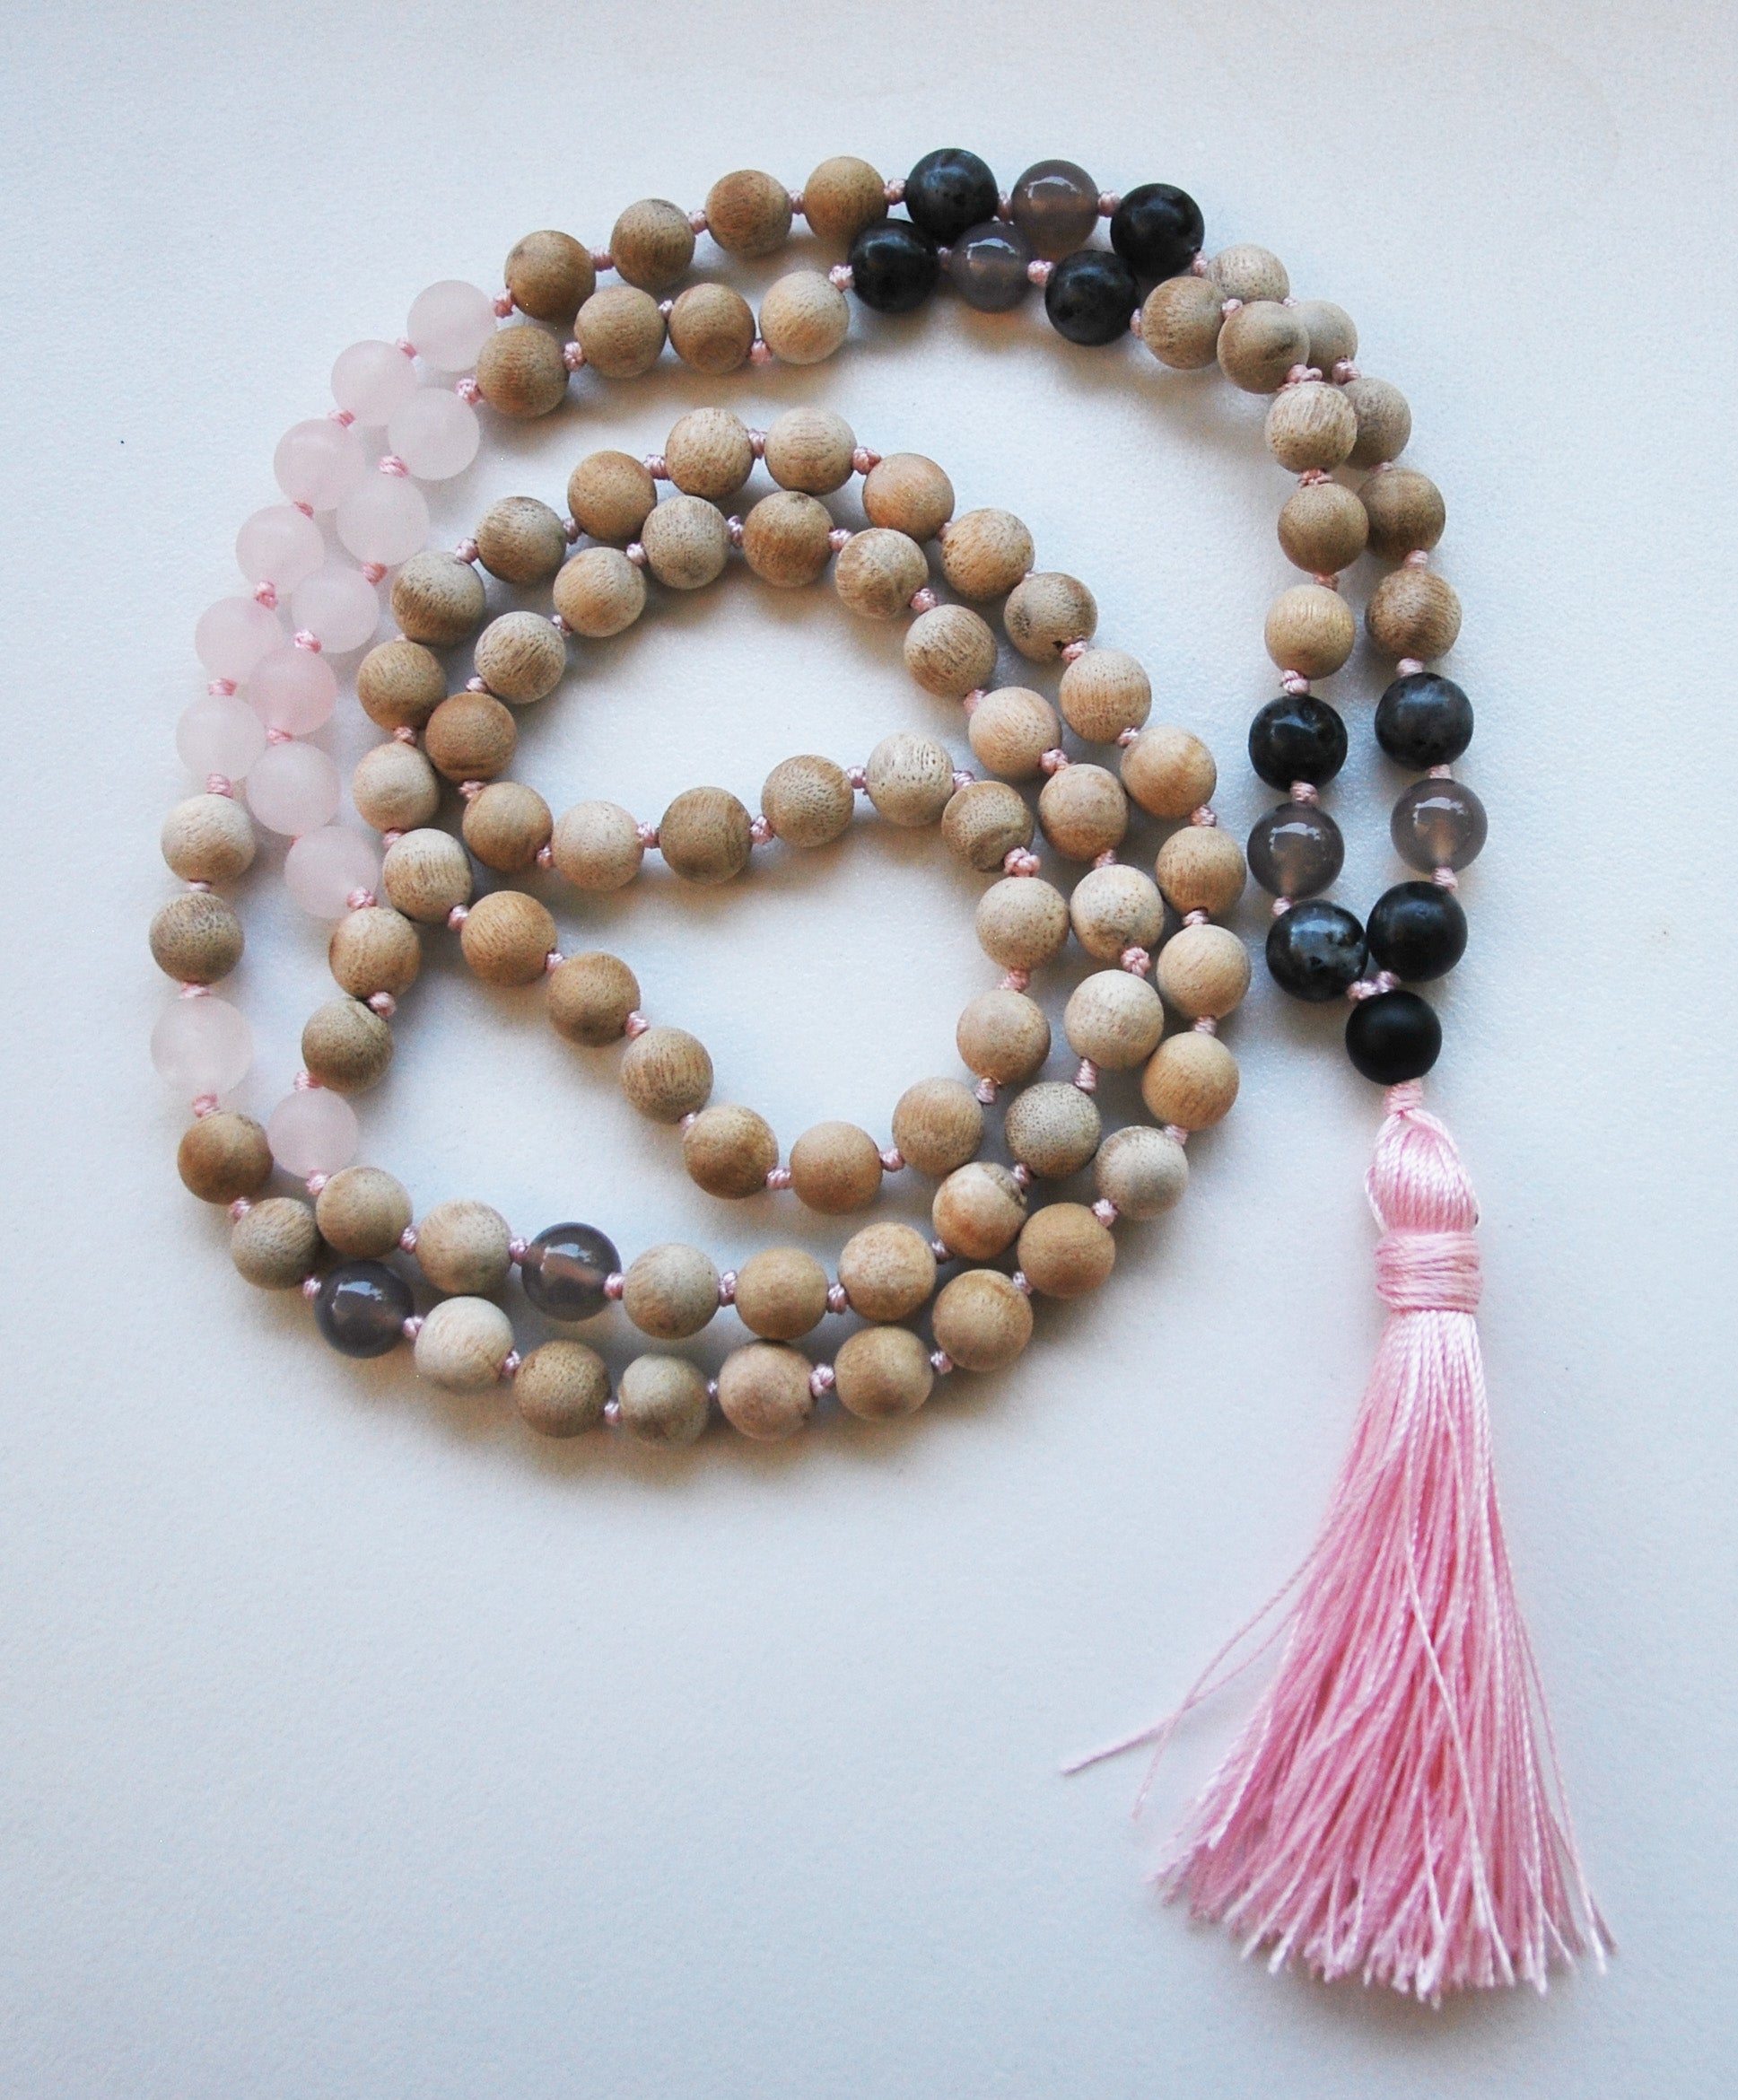 8mm Sandalwood & Rose Quartz  108 Knotted Mala Necklace with Colored Tassel